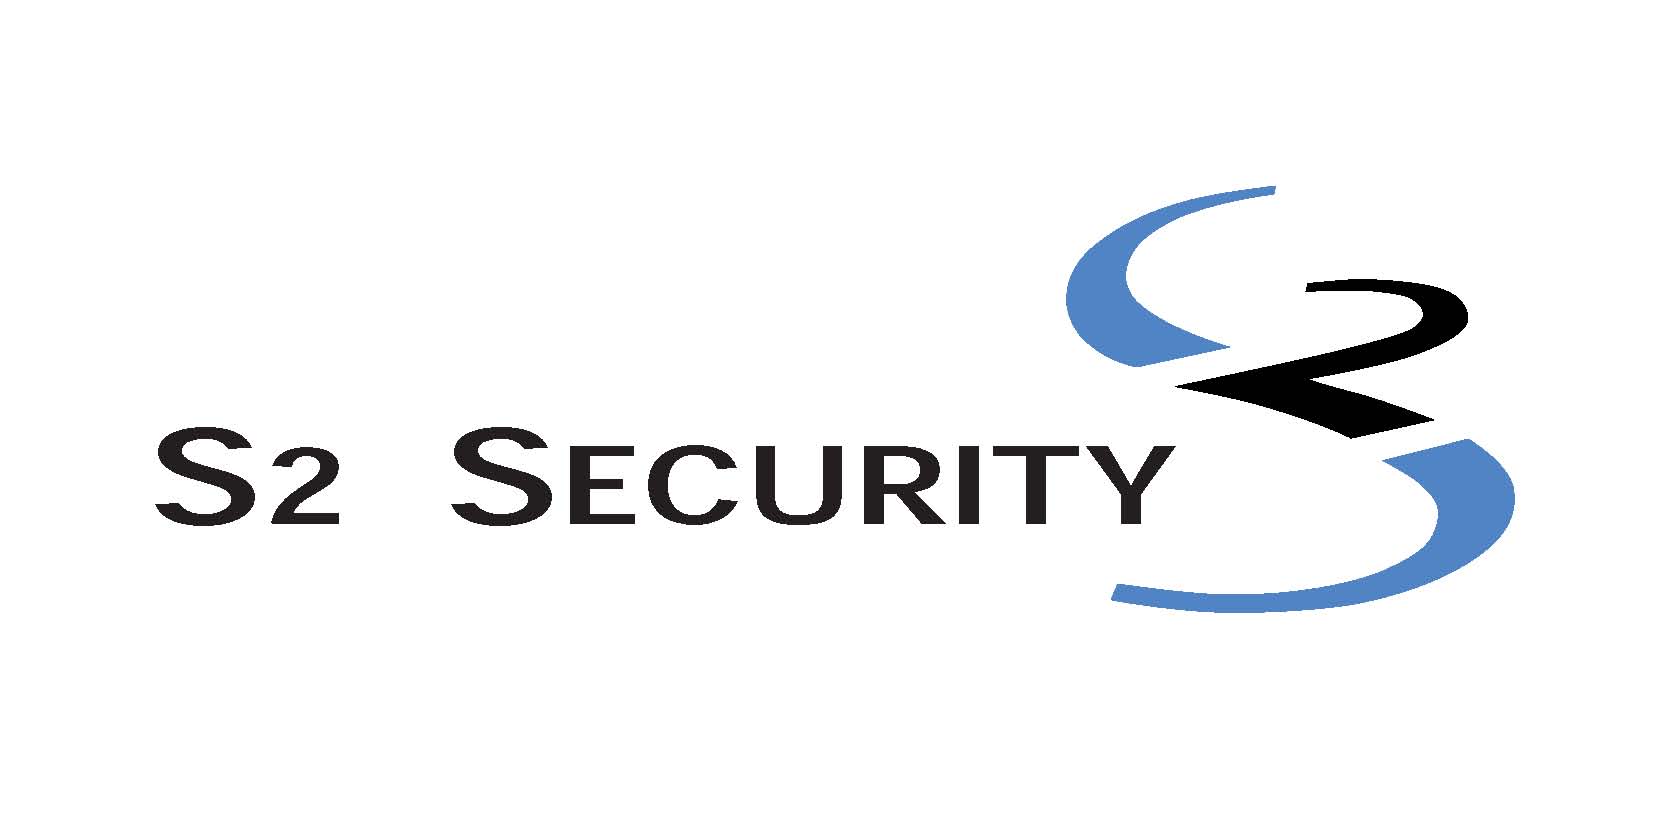 S2 Logo - S2 Security and Access Control Systems Dealer - Spotter Security